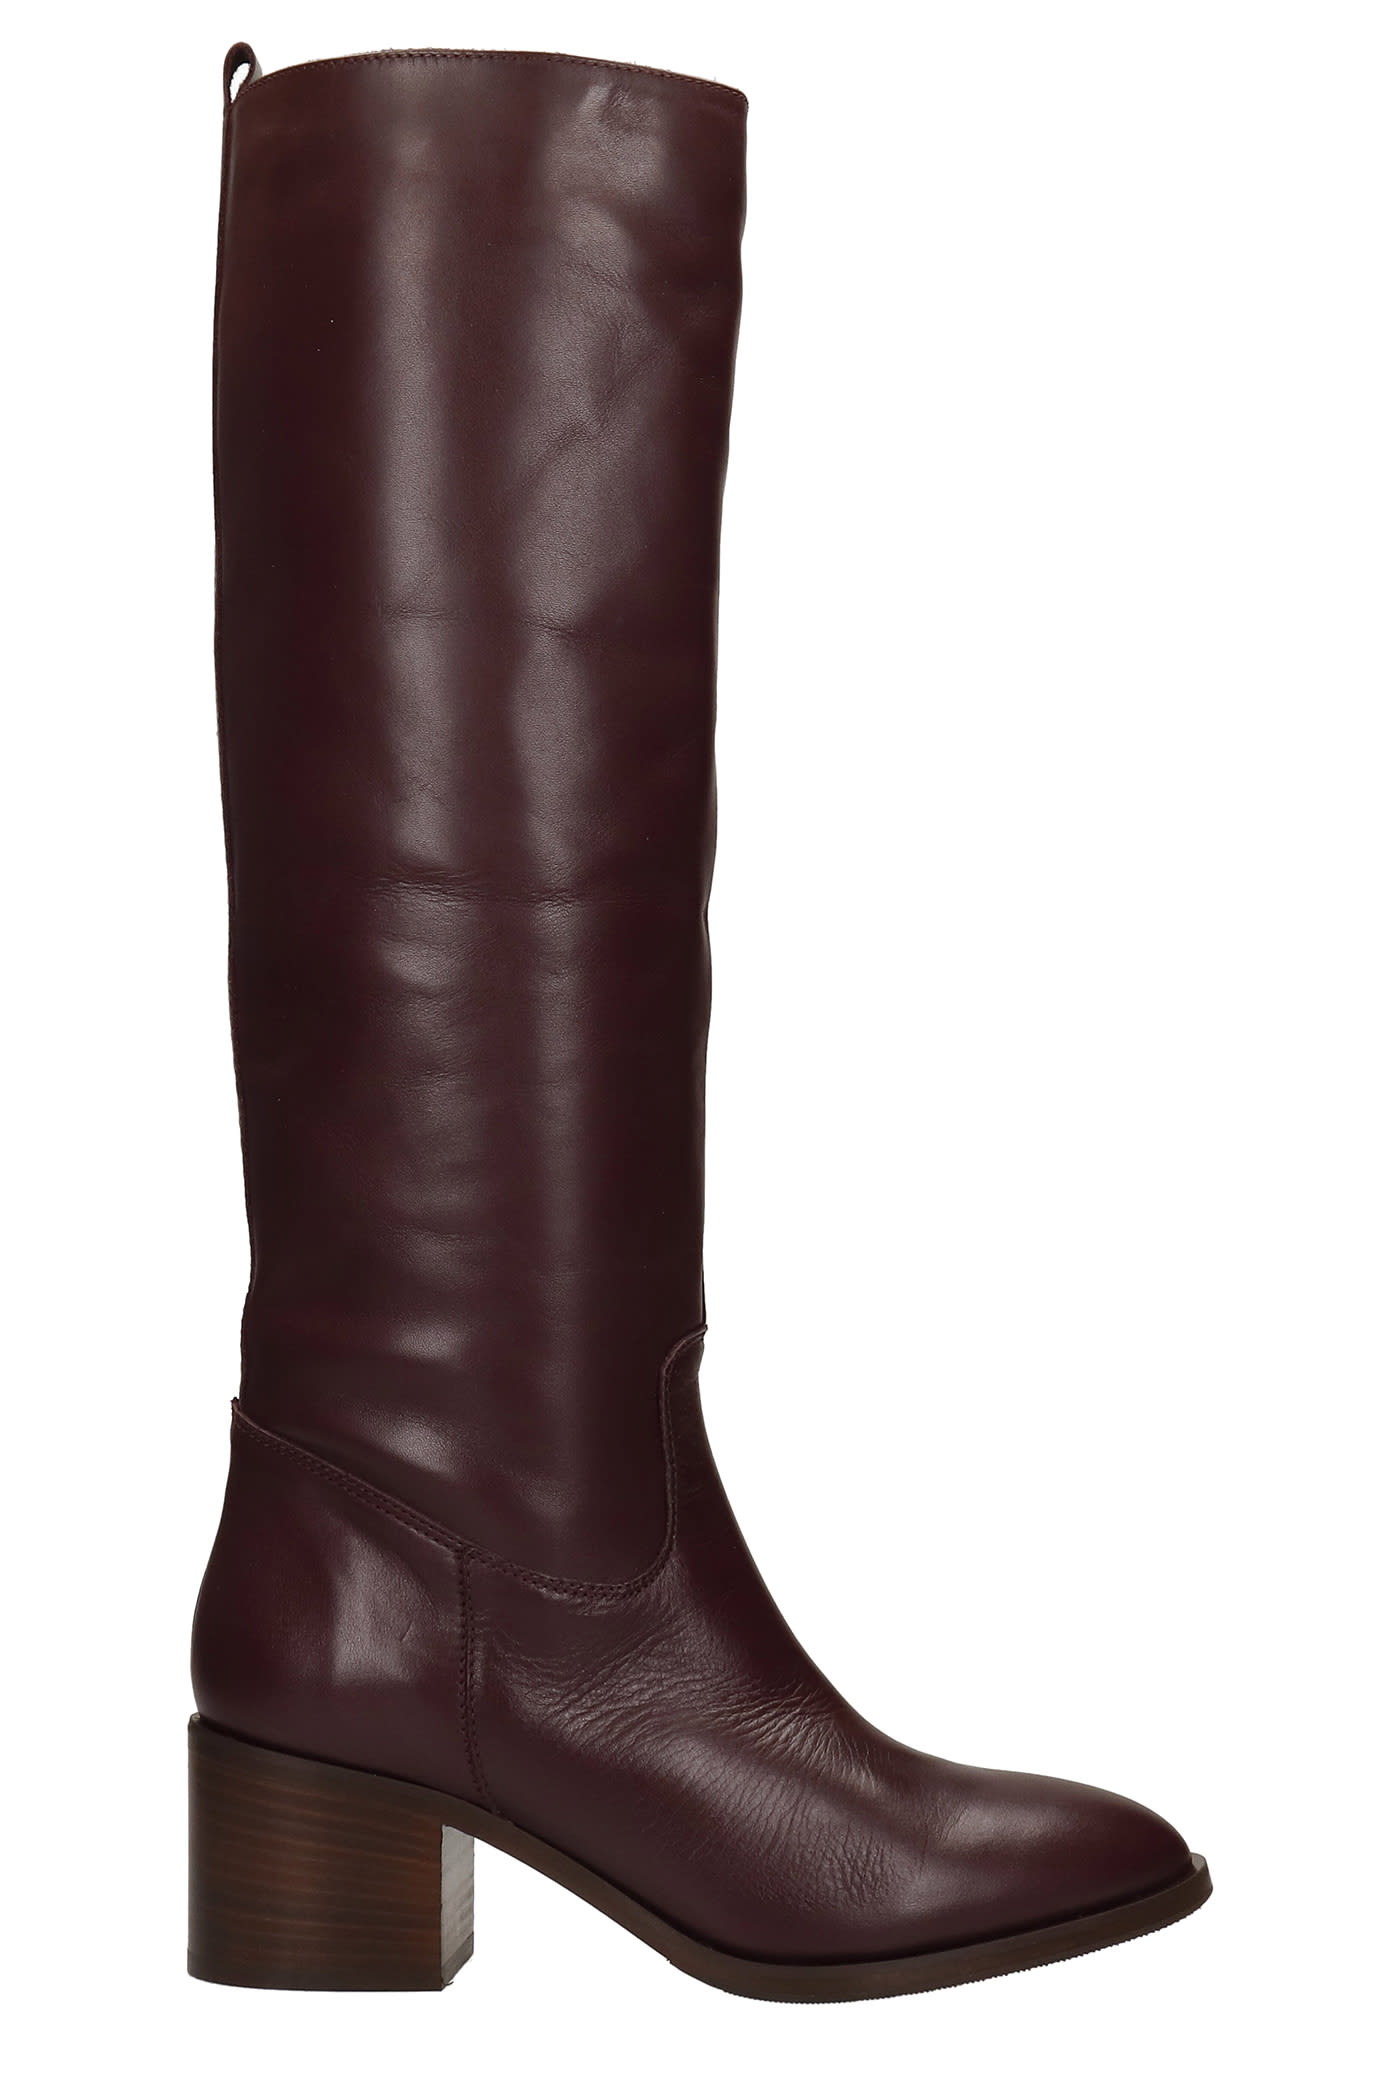 Fabio Rusconi High Heels Boots In Bordeaux Leather